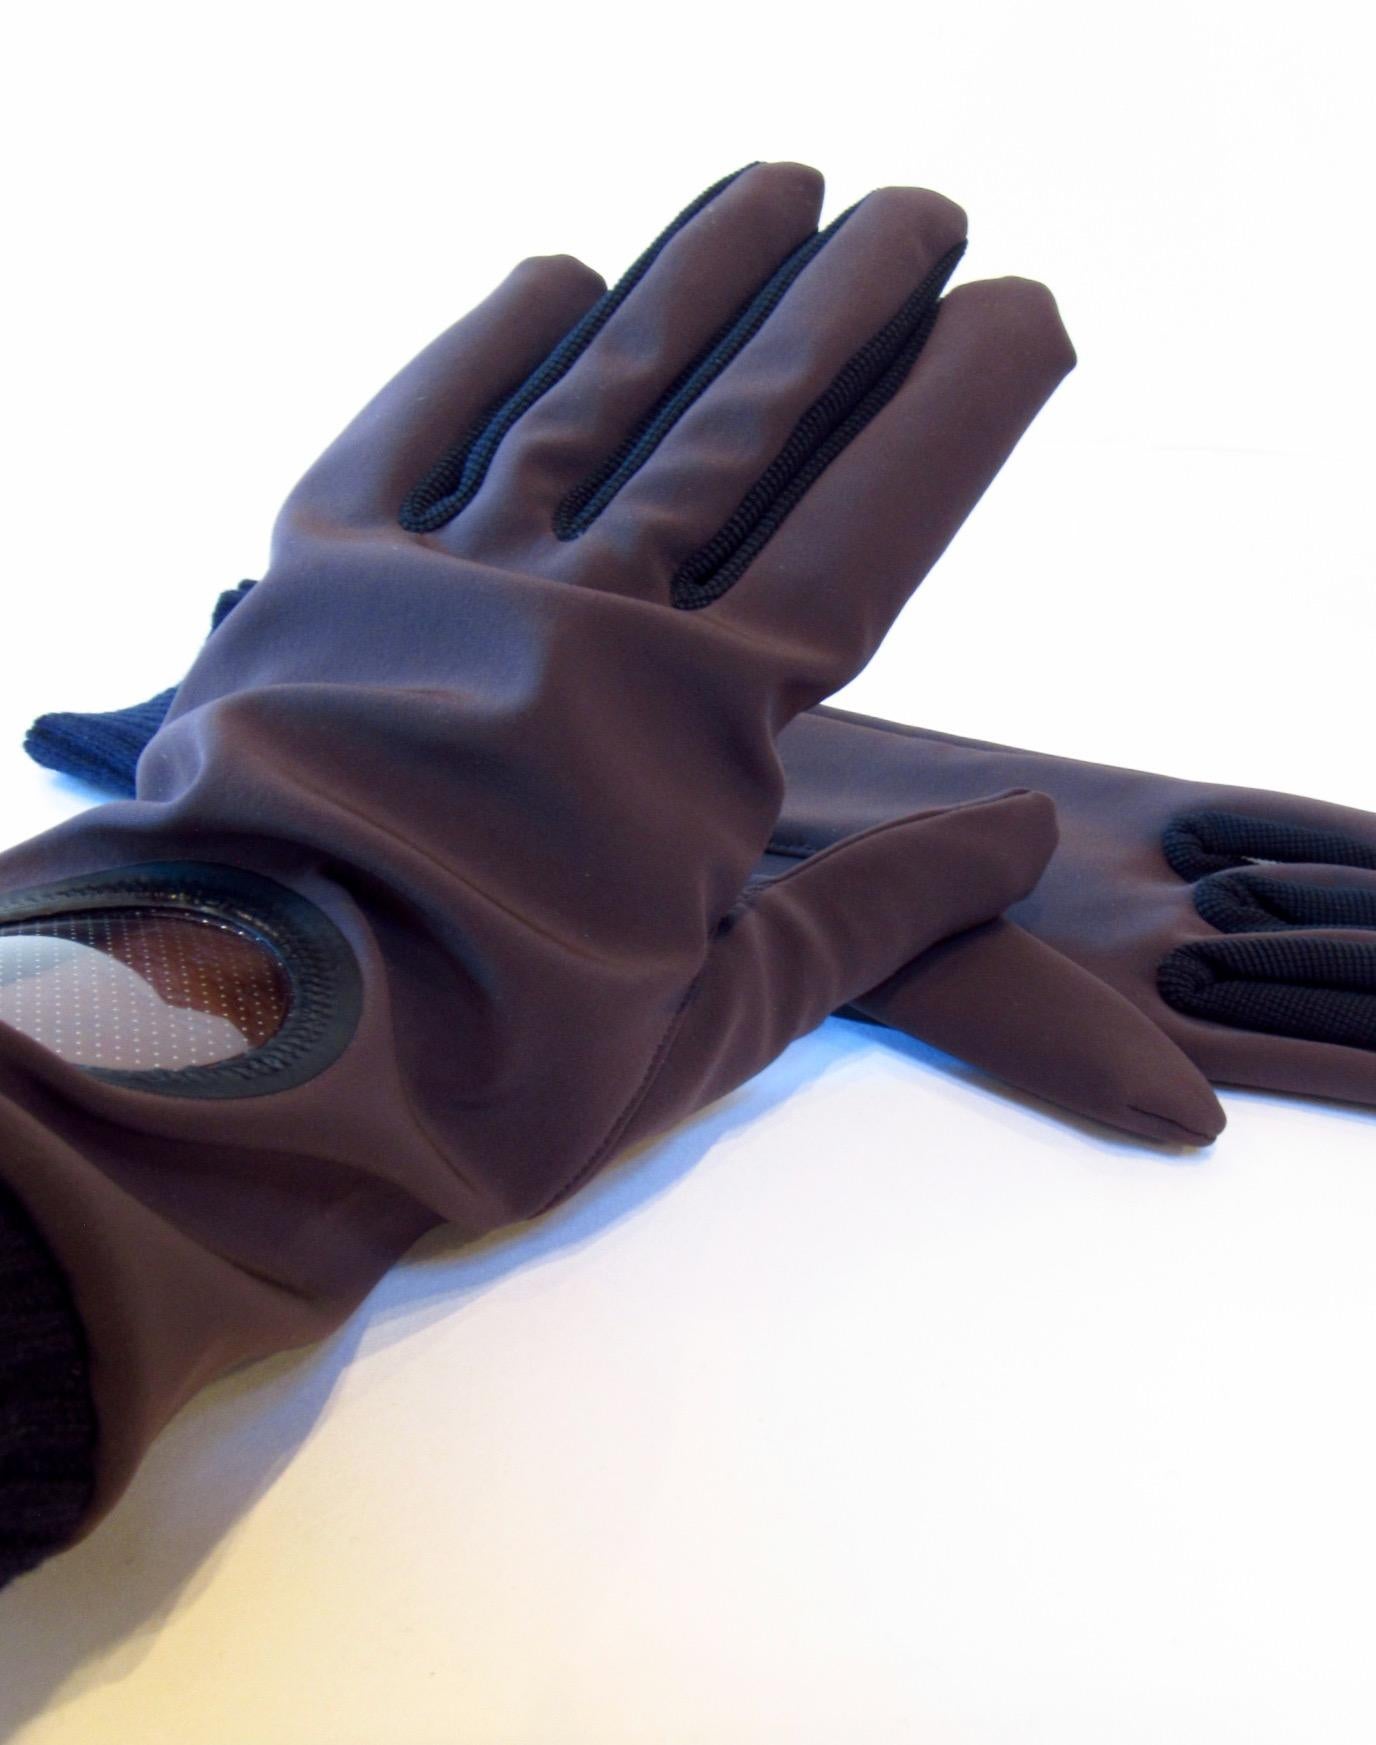 Vintage Undercover dark brown nylon and polyurethane gloves with porthole window on left wrist. The brown is offset with black wool cuffs and detail between fingers.